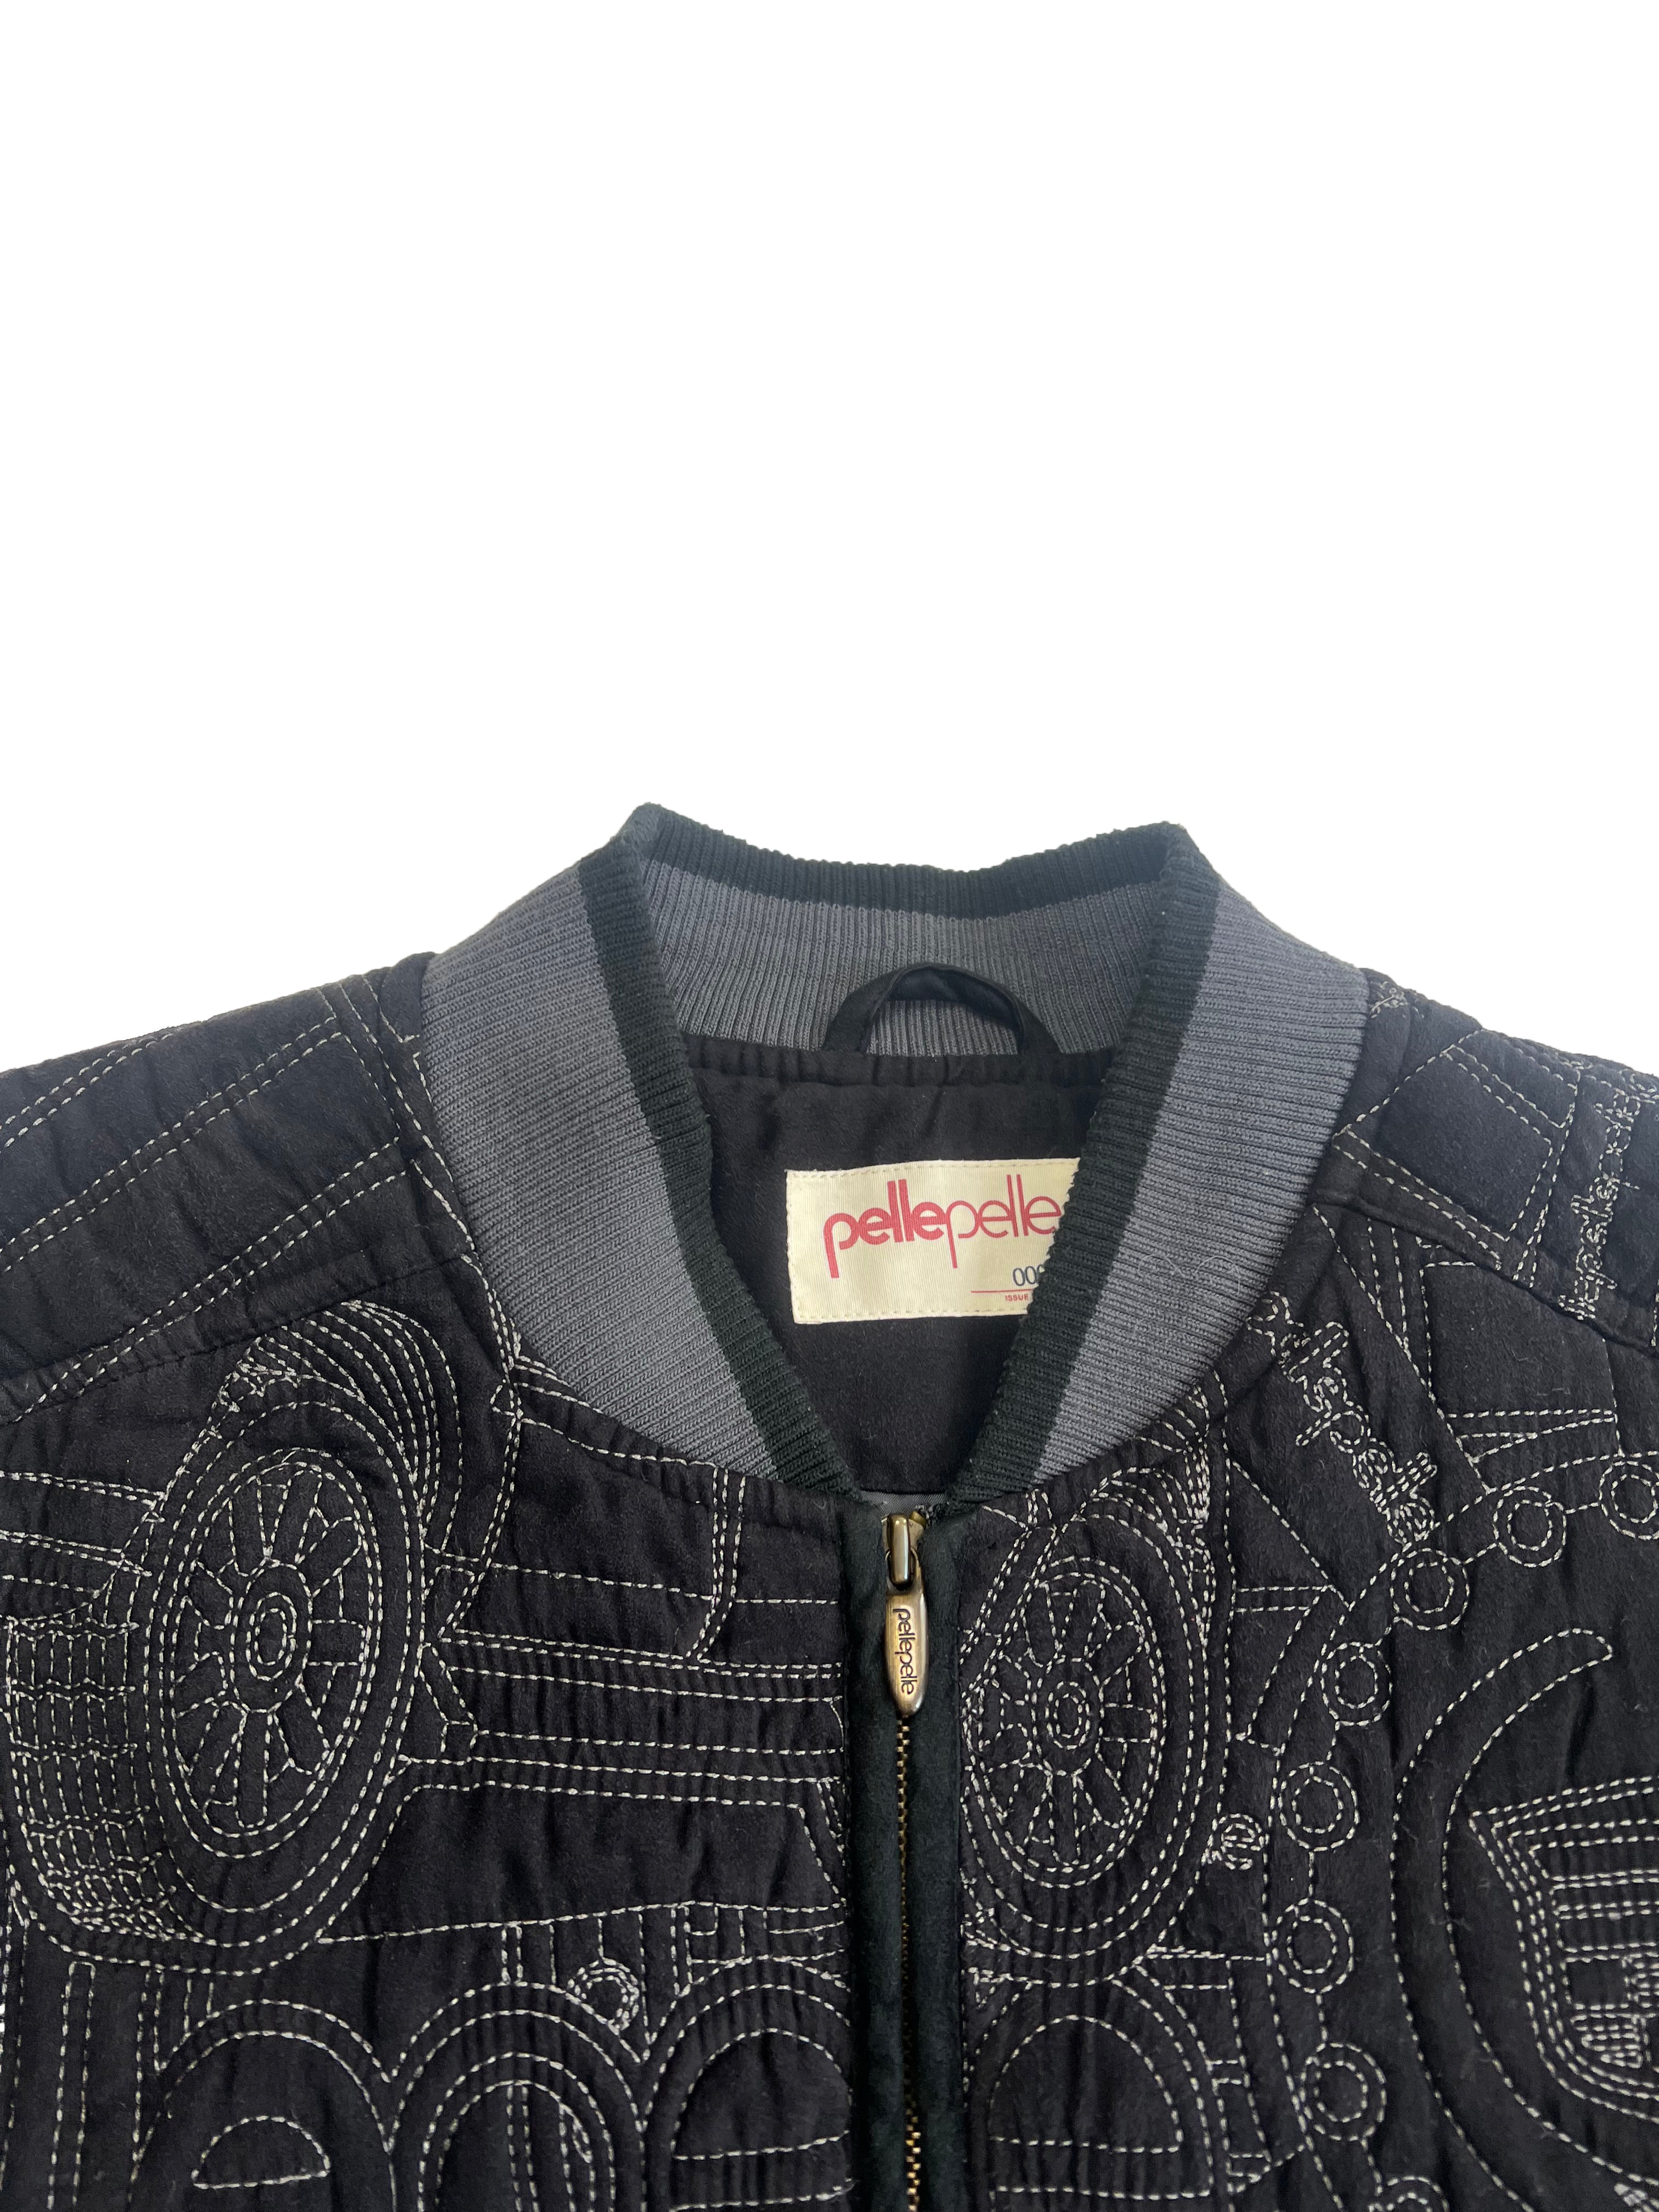 Pelle Pelle 'Escalade' Embroidered Bomber Jacket 00's